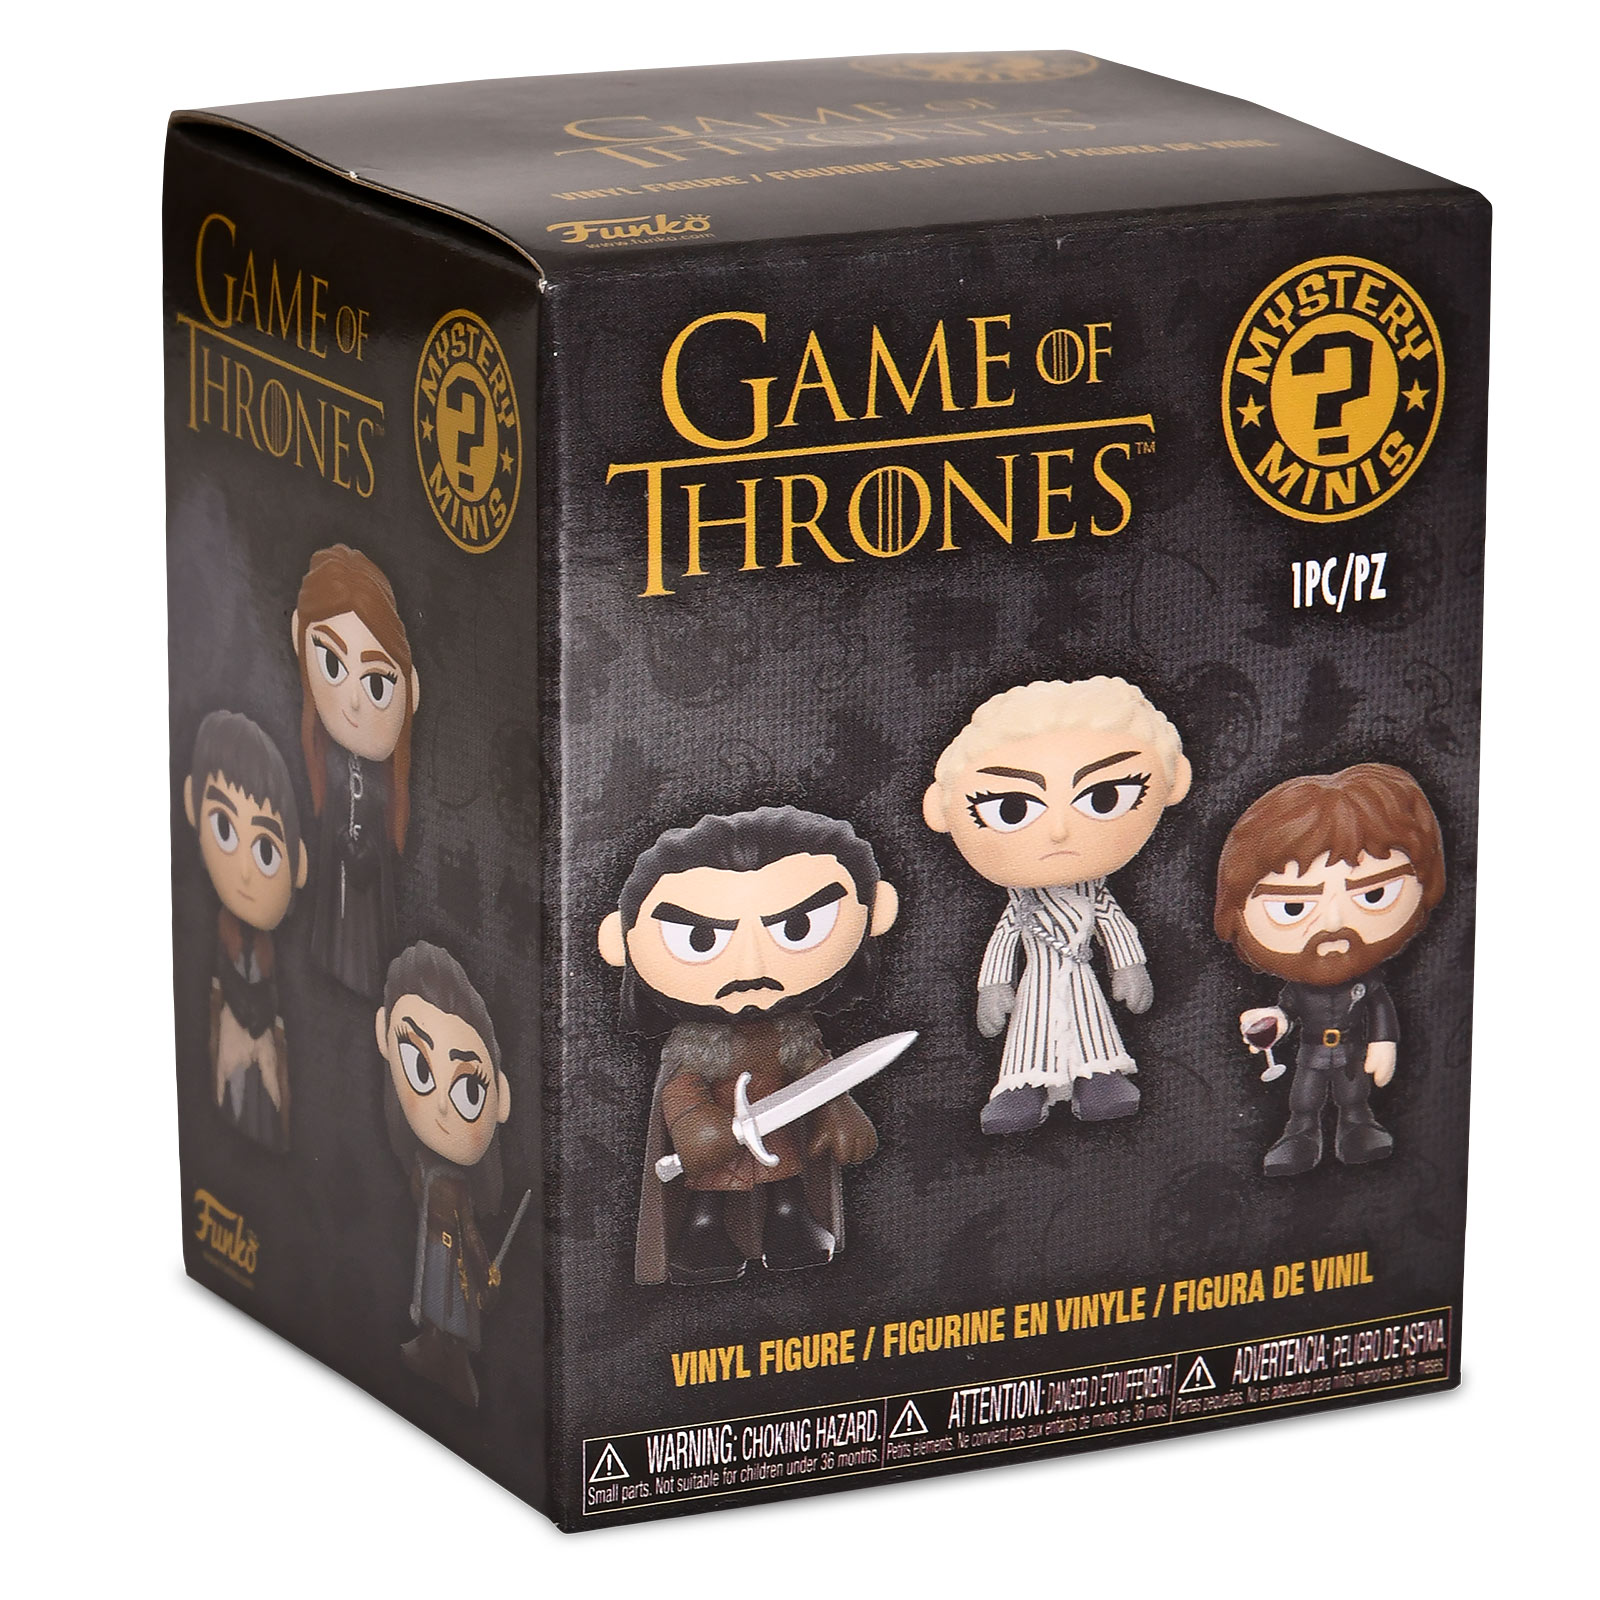 Game of Thrones - Funko Mystery Minis figure series 4